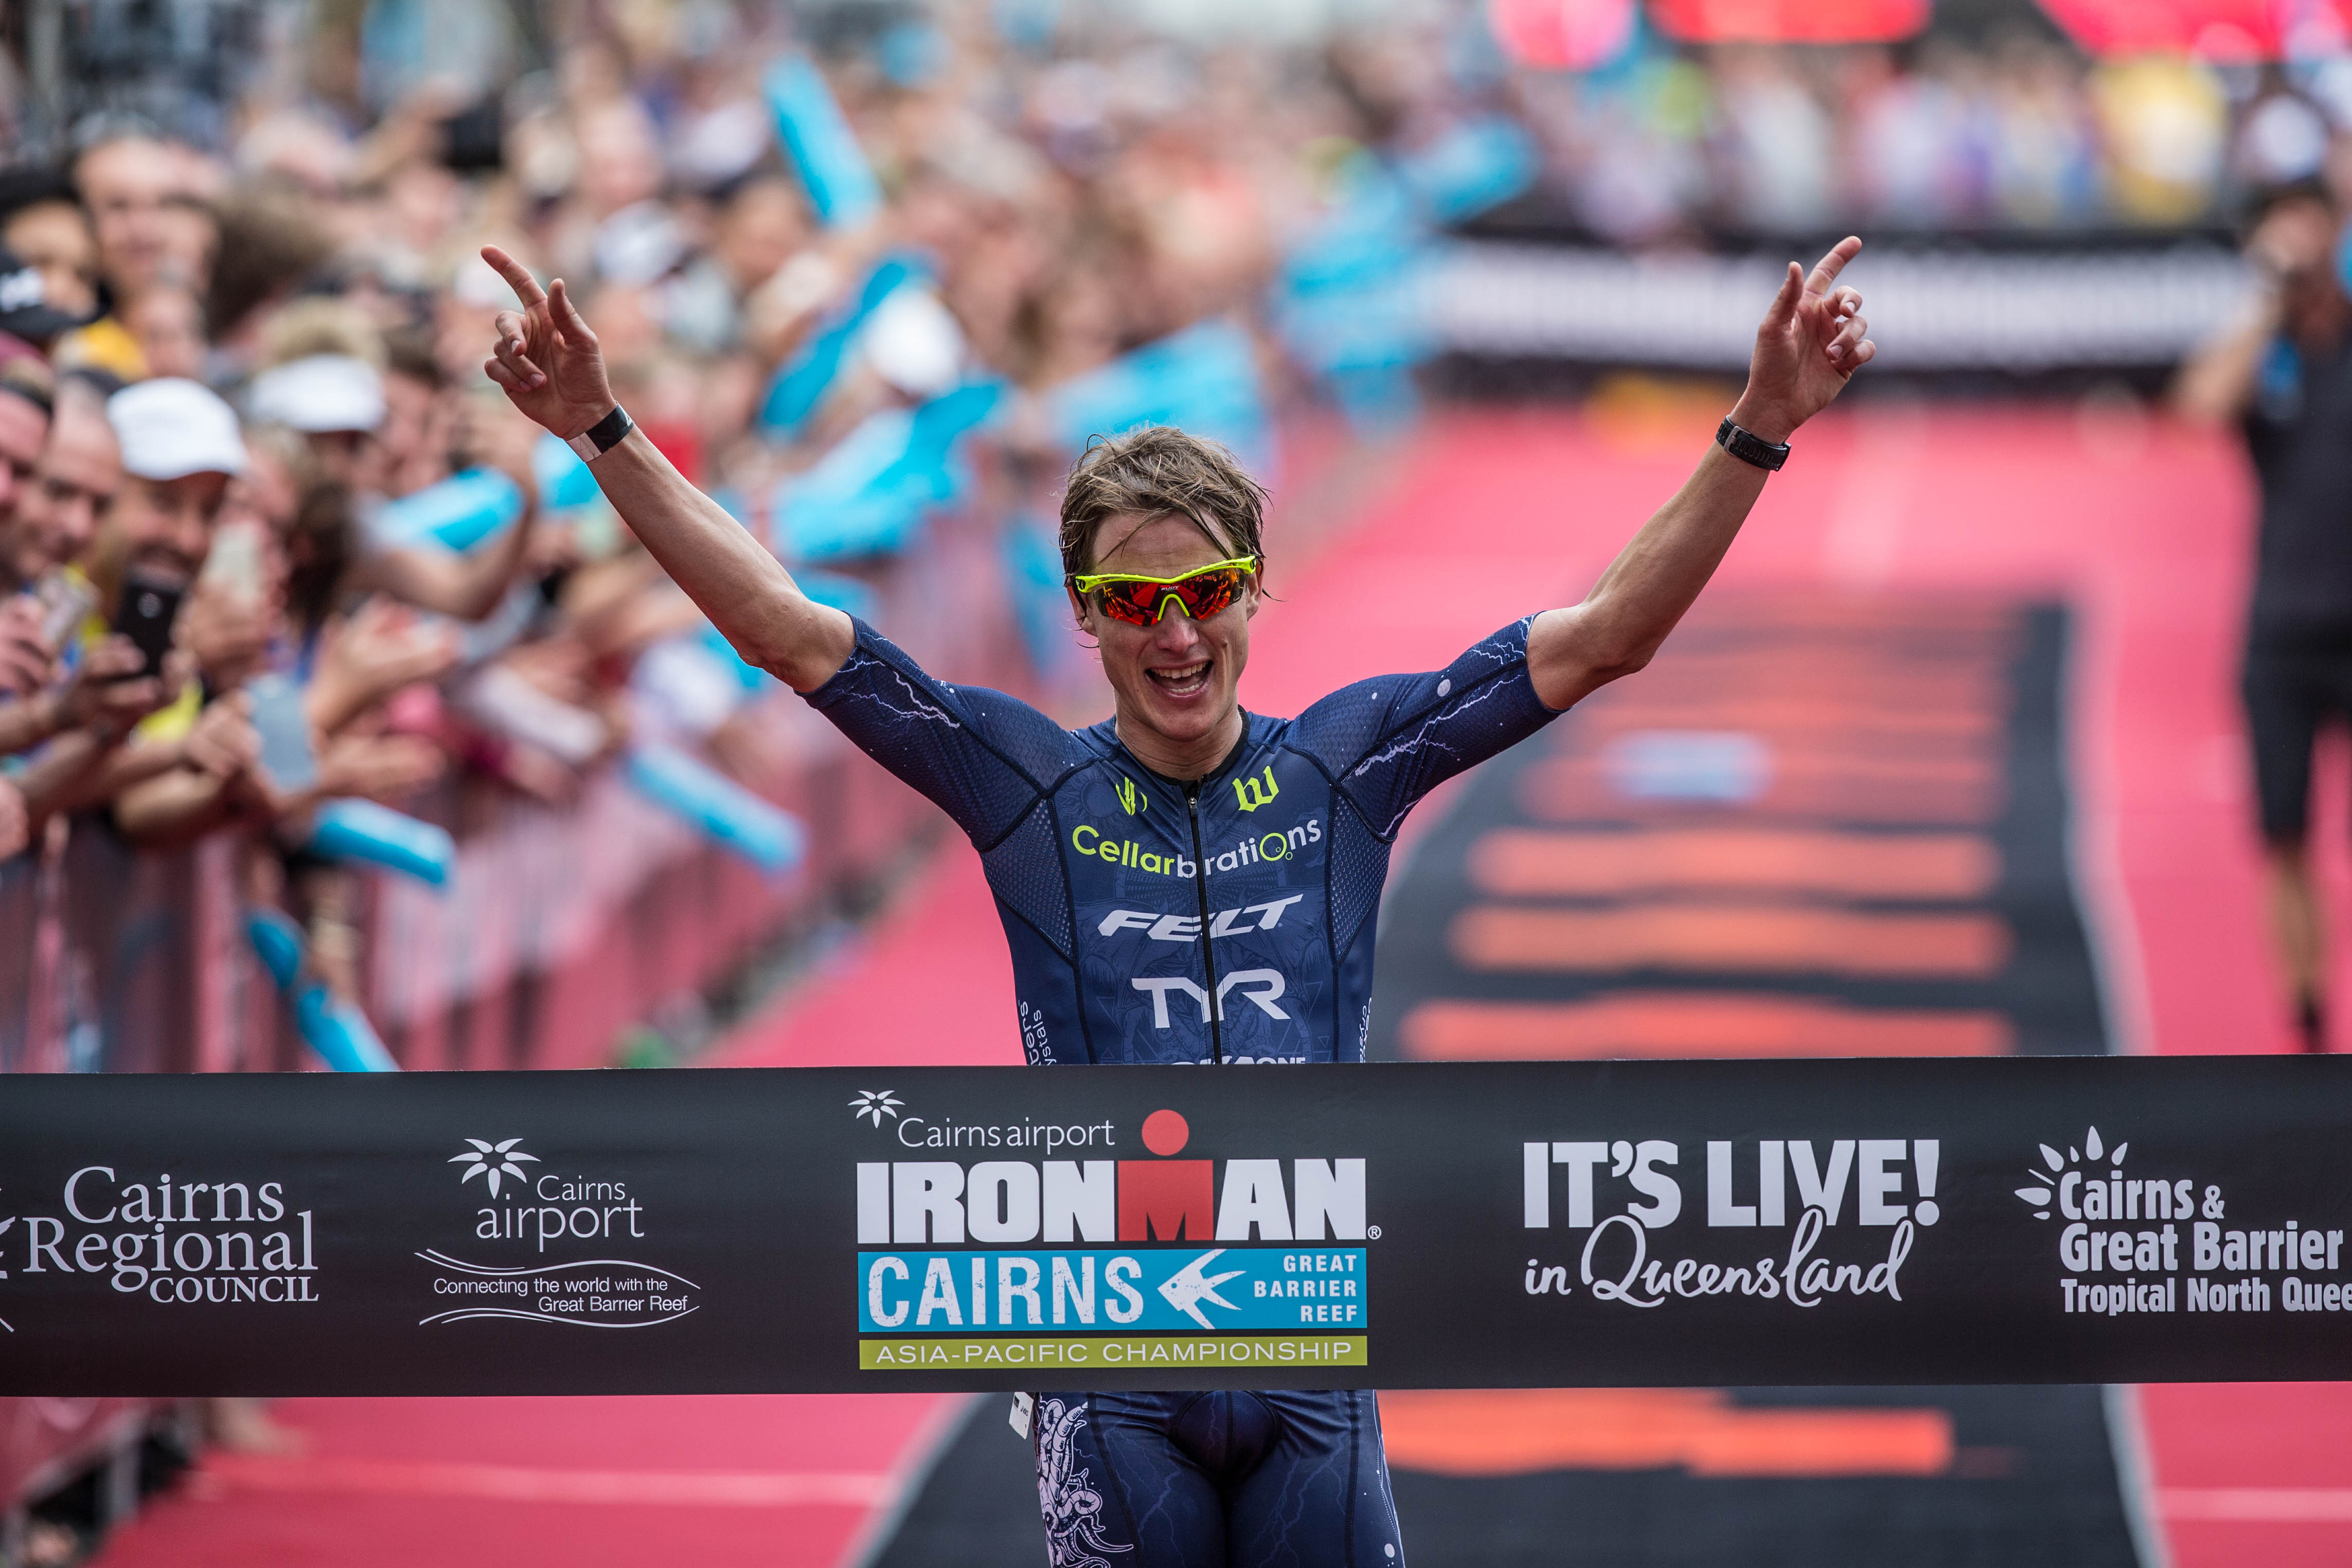 Ironman and a Return to Racing